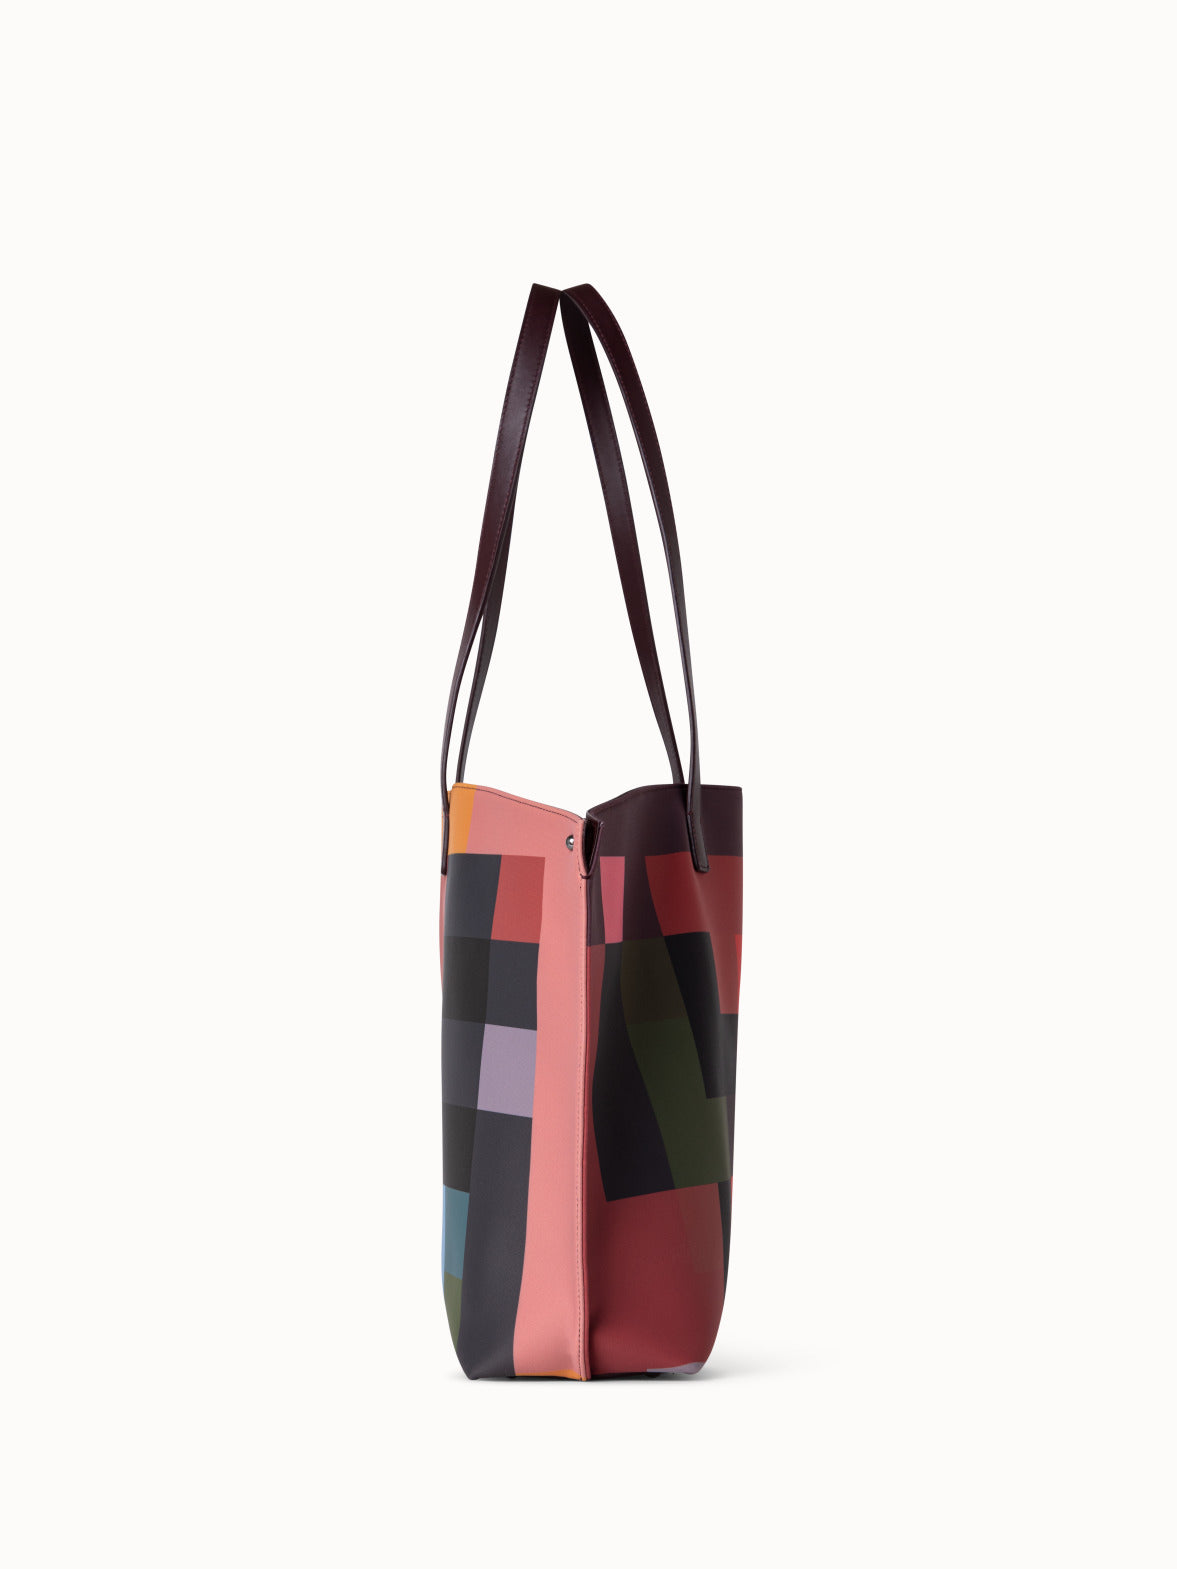 Medium Ai Shoulder Bag in Technical Fabric with Interior Abstract Prin